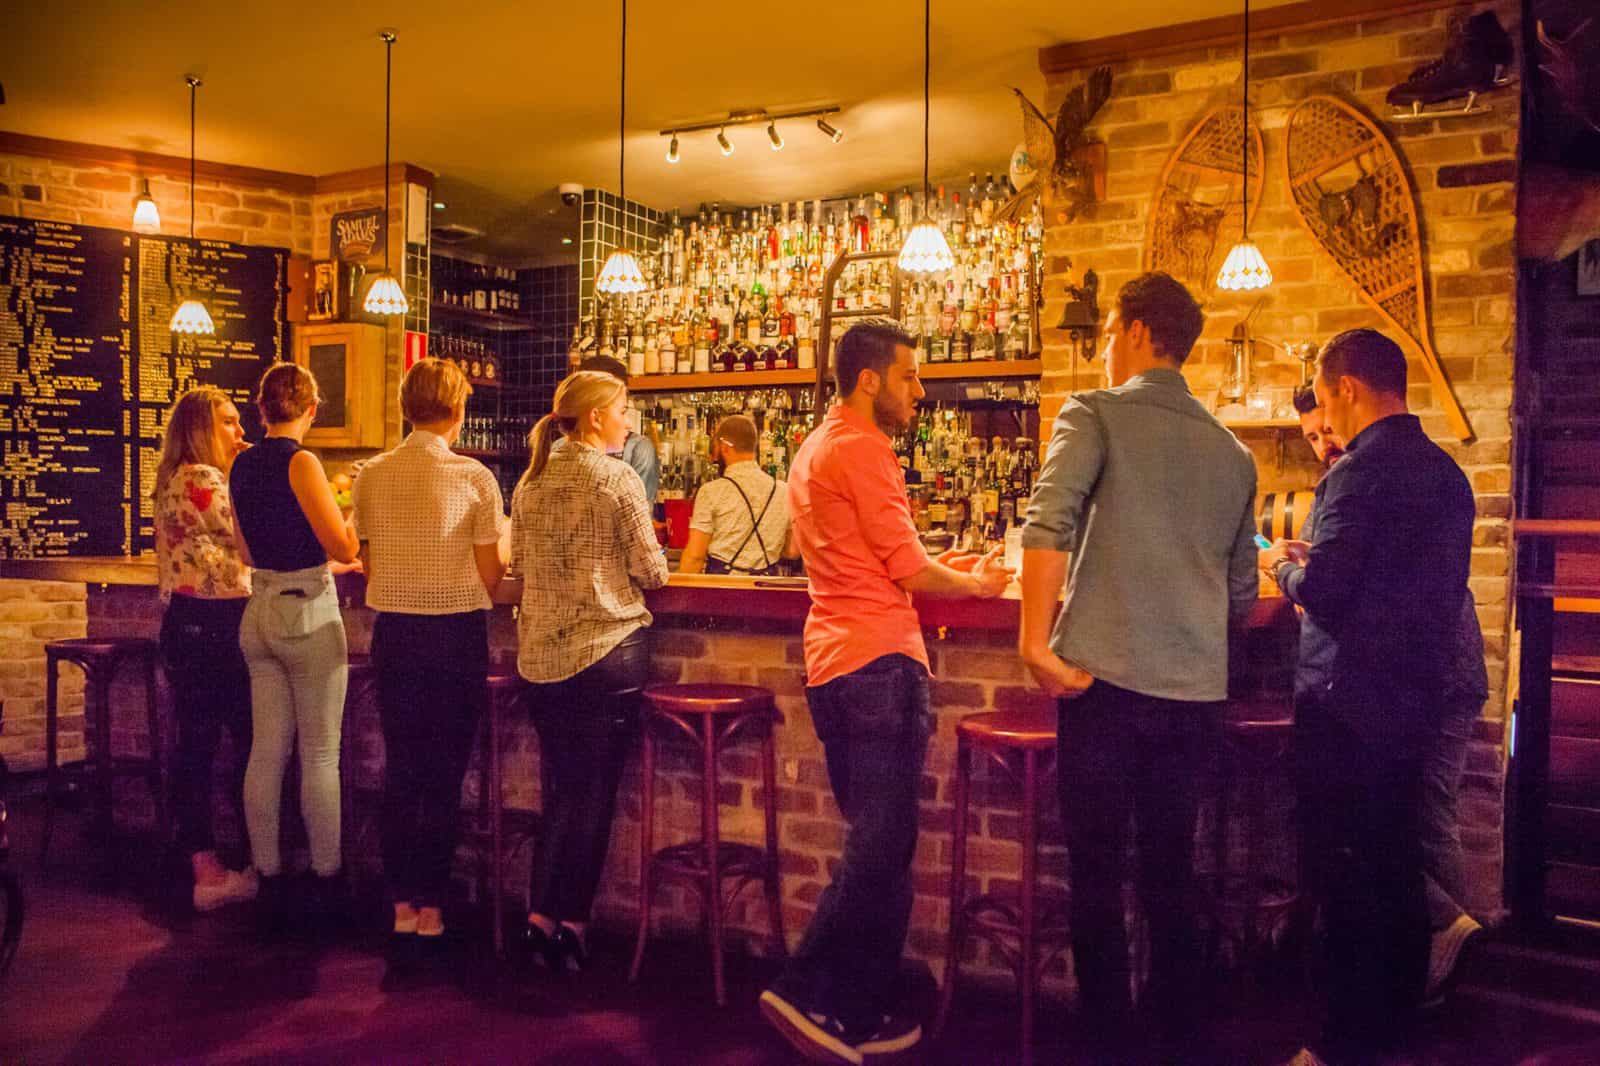 Young people lined up at the bar for cocktails